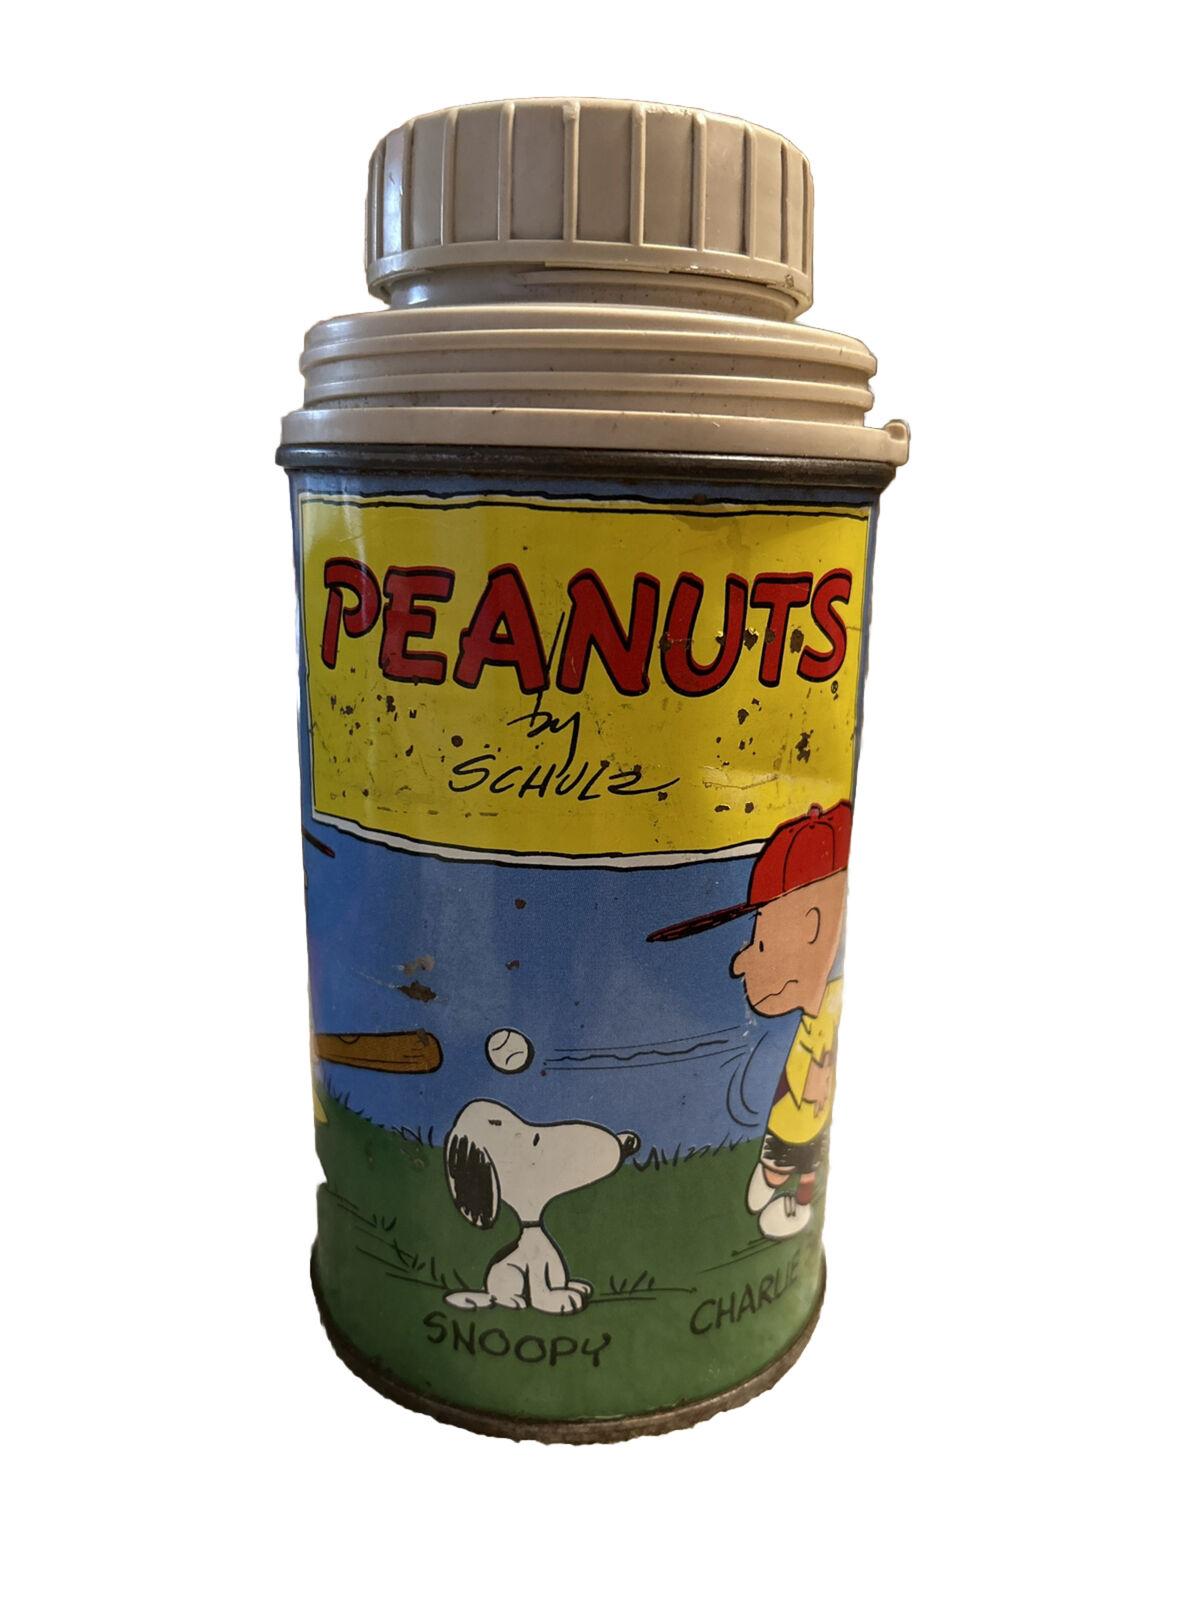 Vintage 1959 PEANUTS Thermos #2868 Charlie BrownSnoopy Linus Lucy NO CUP